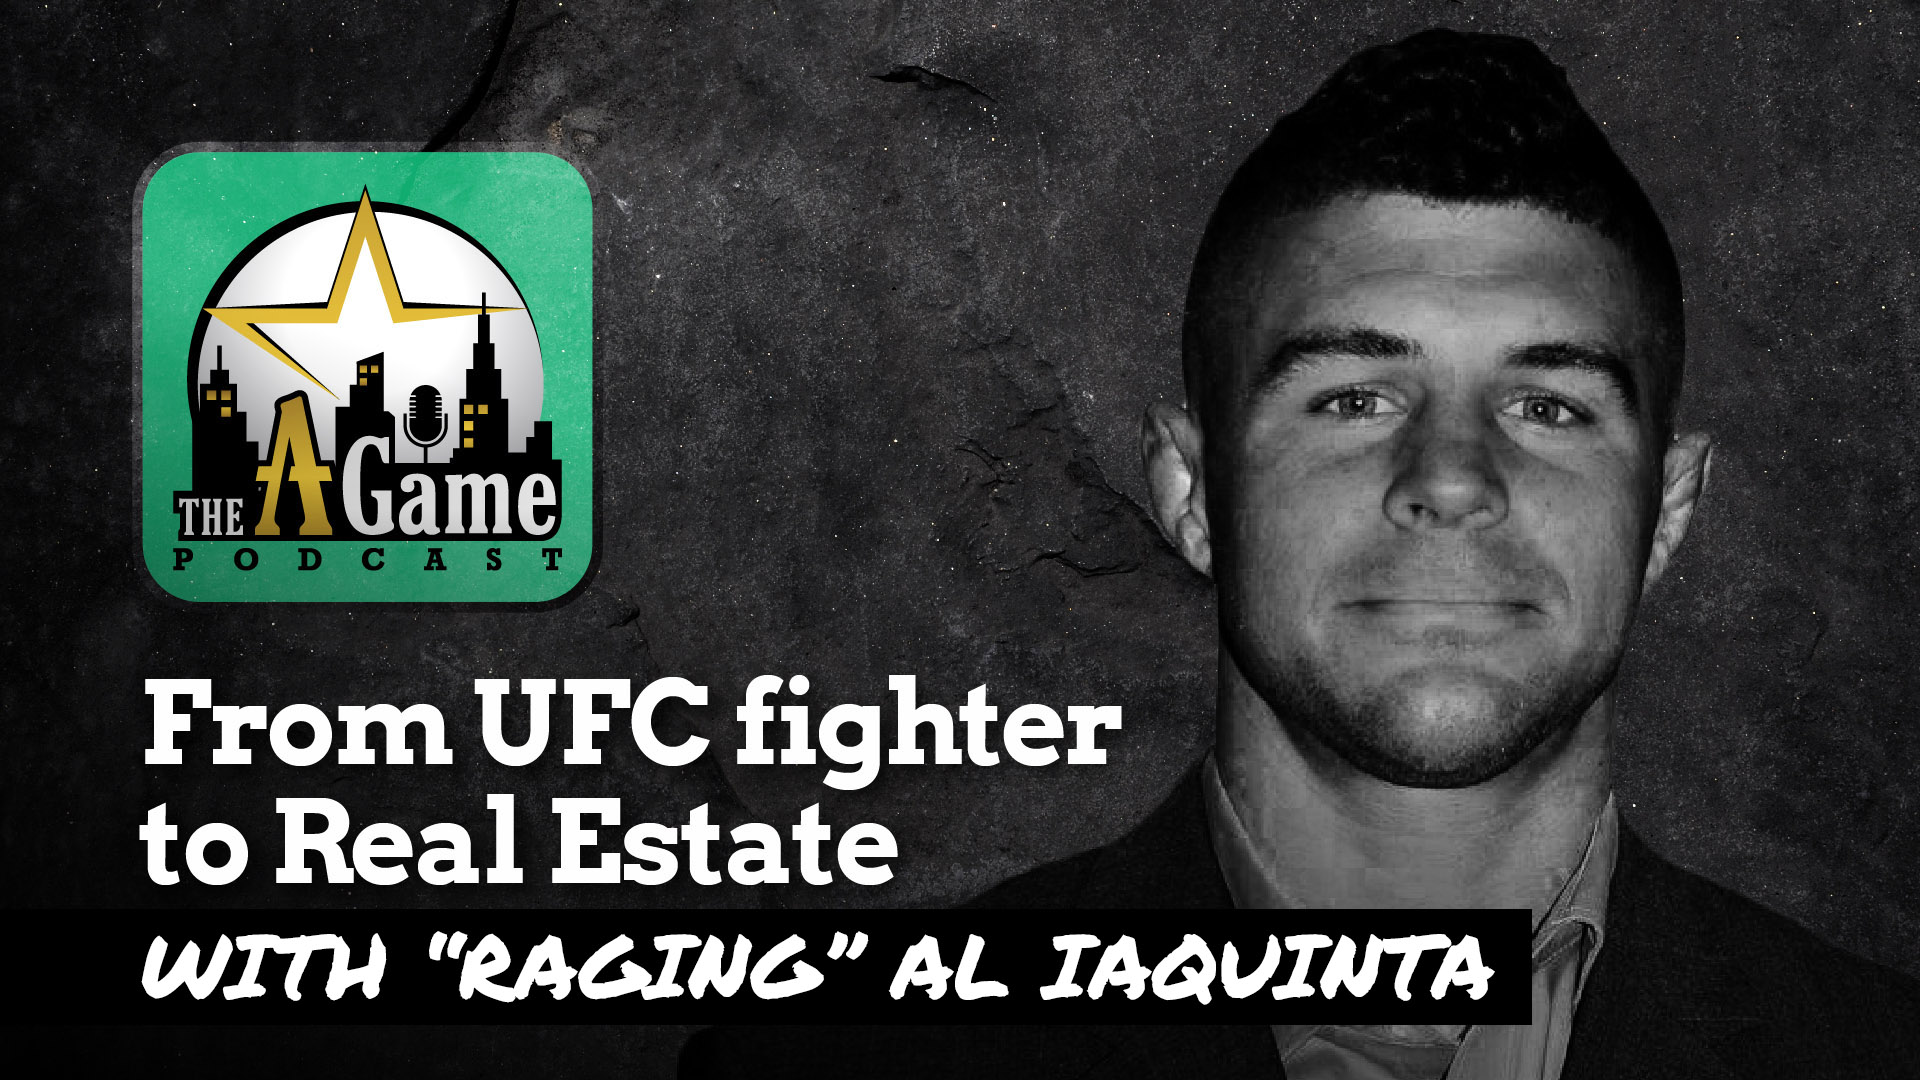 From UFC fighter to Real Estate with "Raging" Al Iaquinta